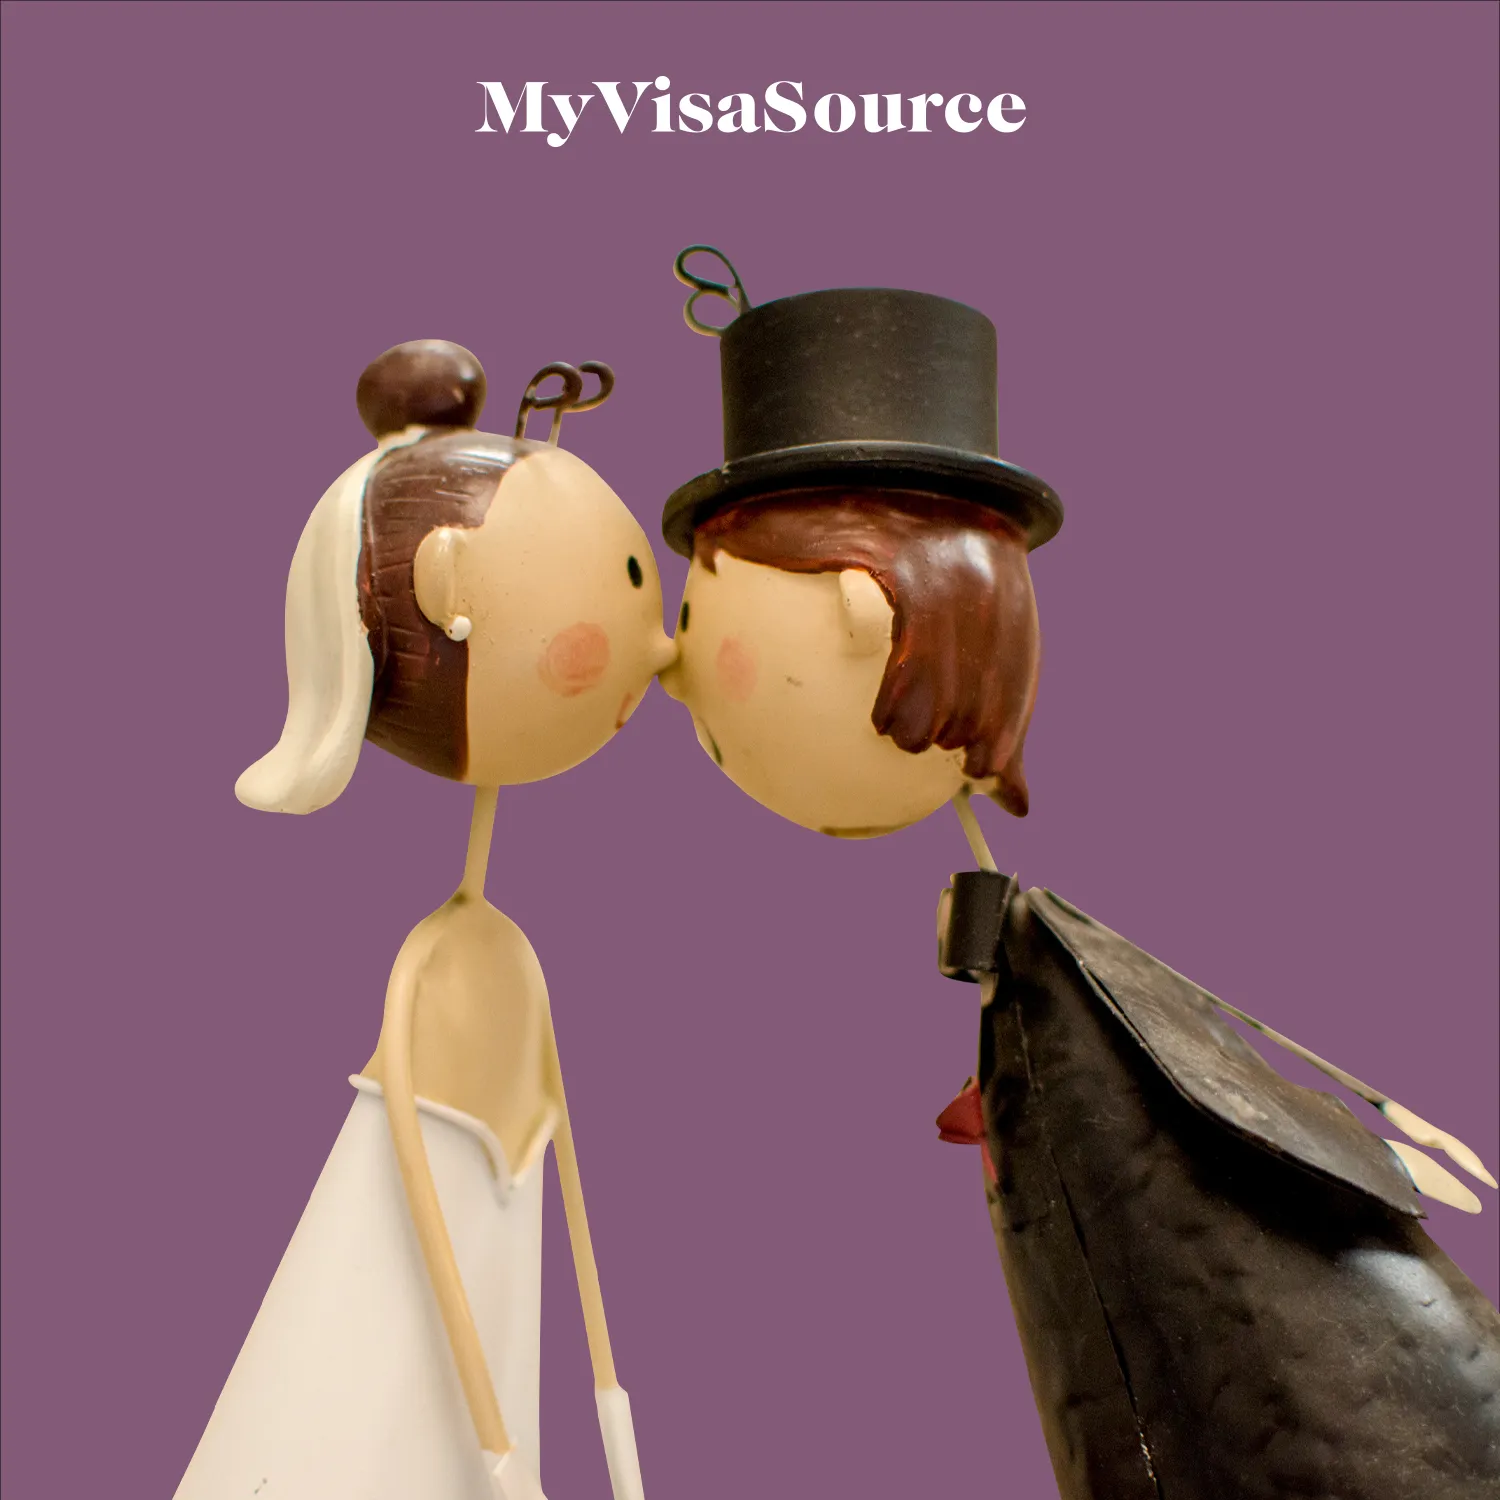 cute wooden cartoonish dolls couple dressed in wedding attire with purple background by my visa source